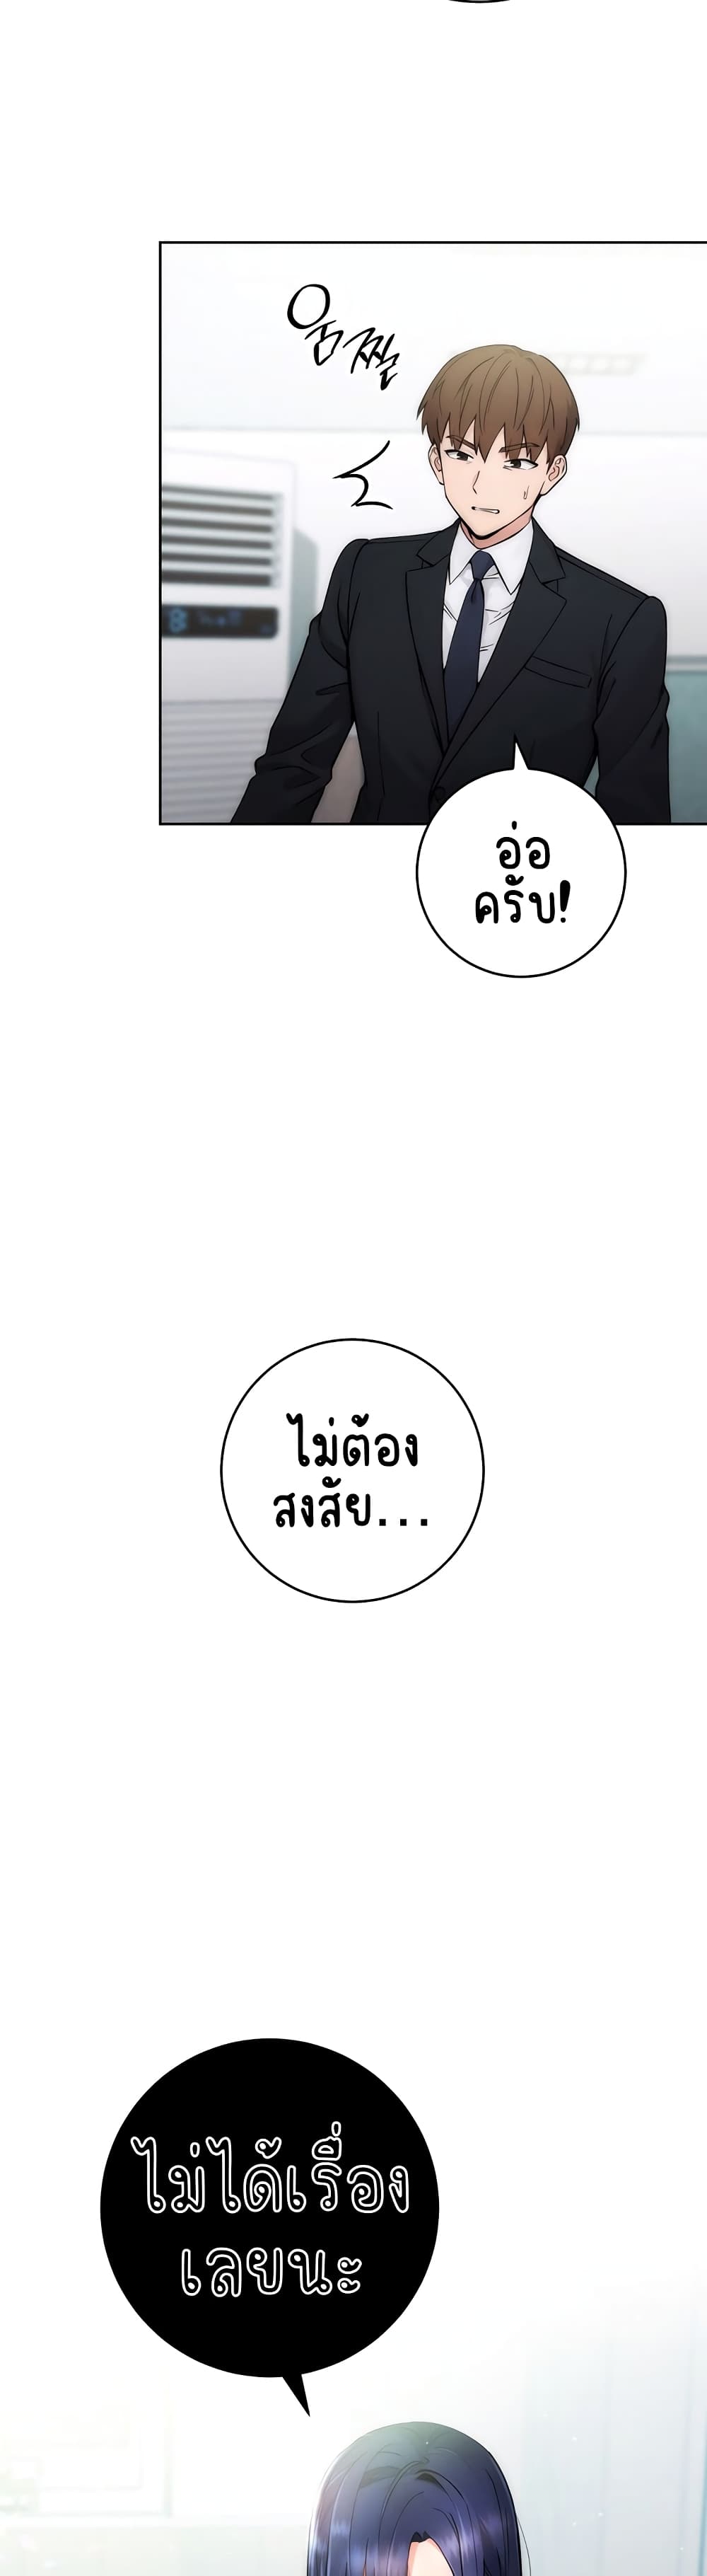 Outsider: The Invisible Man ตอนที่ 1 ภาพ 19